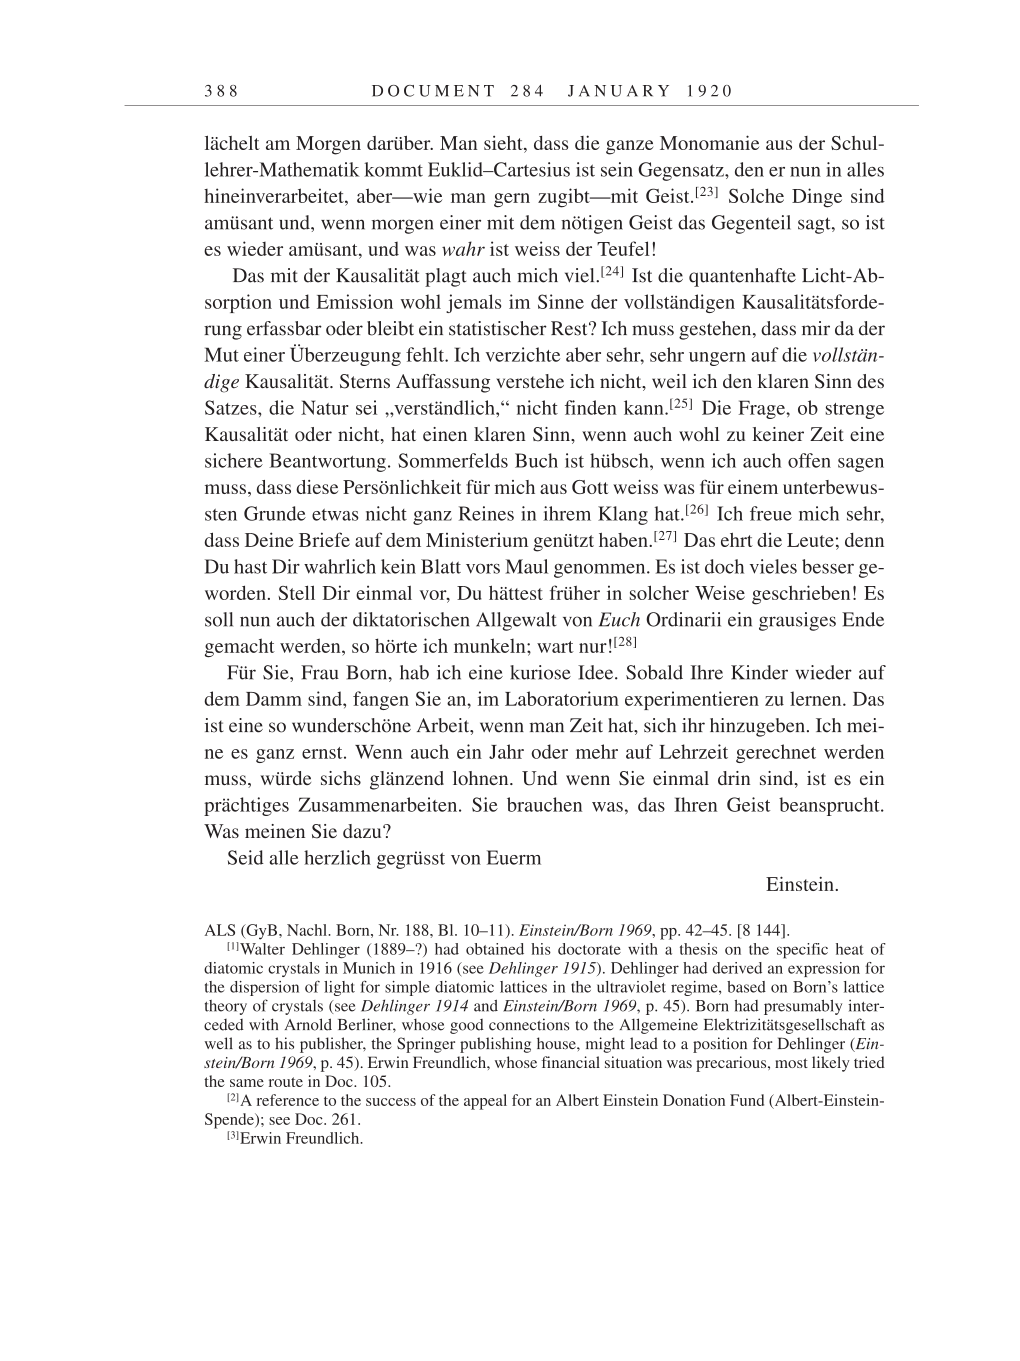 Volume 9: The Berlin Years: Correspondence January 1919-April 1920 page 388